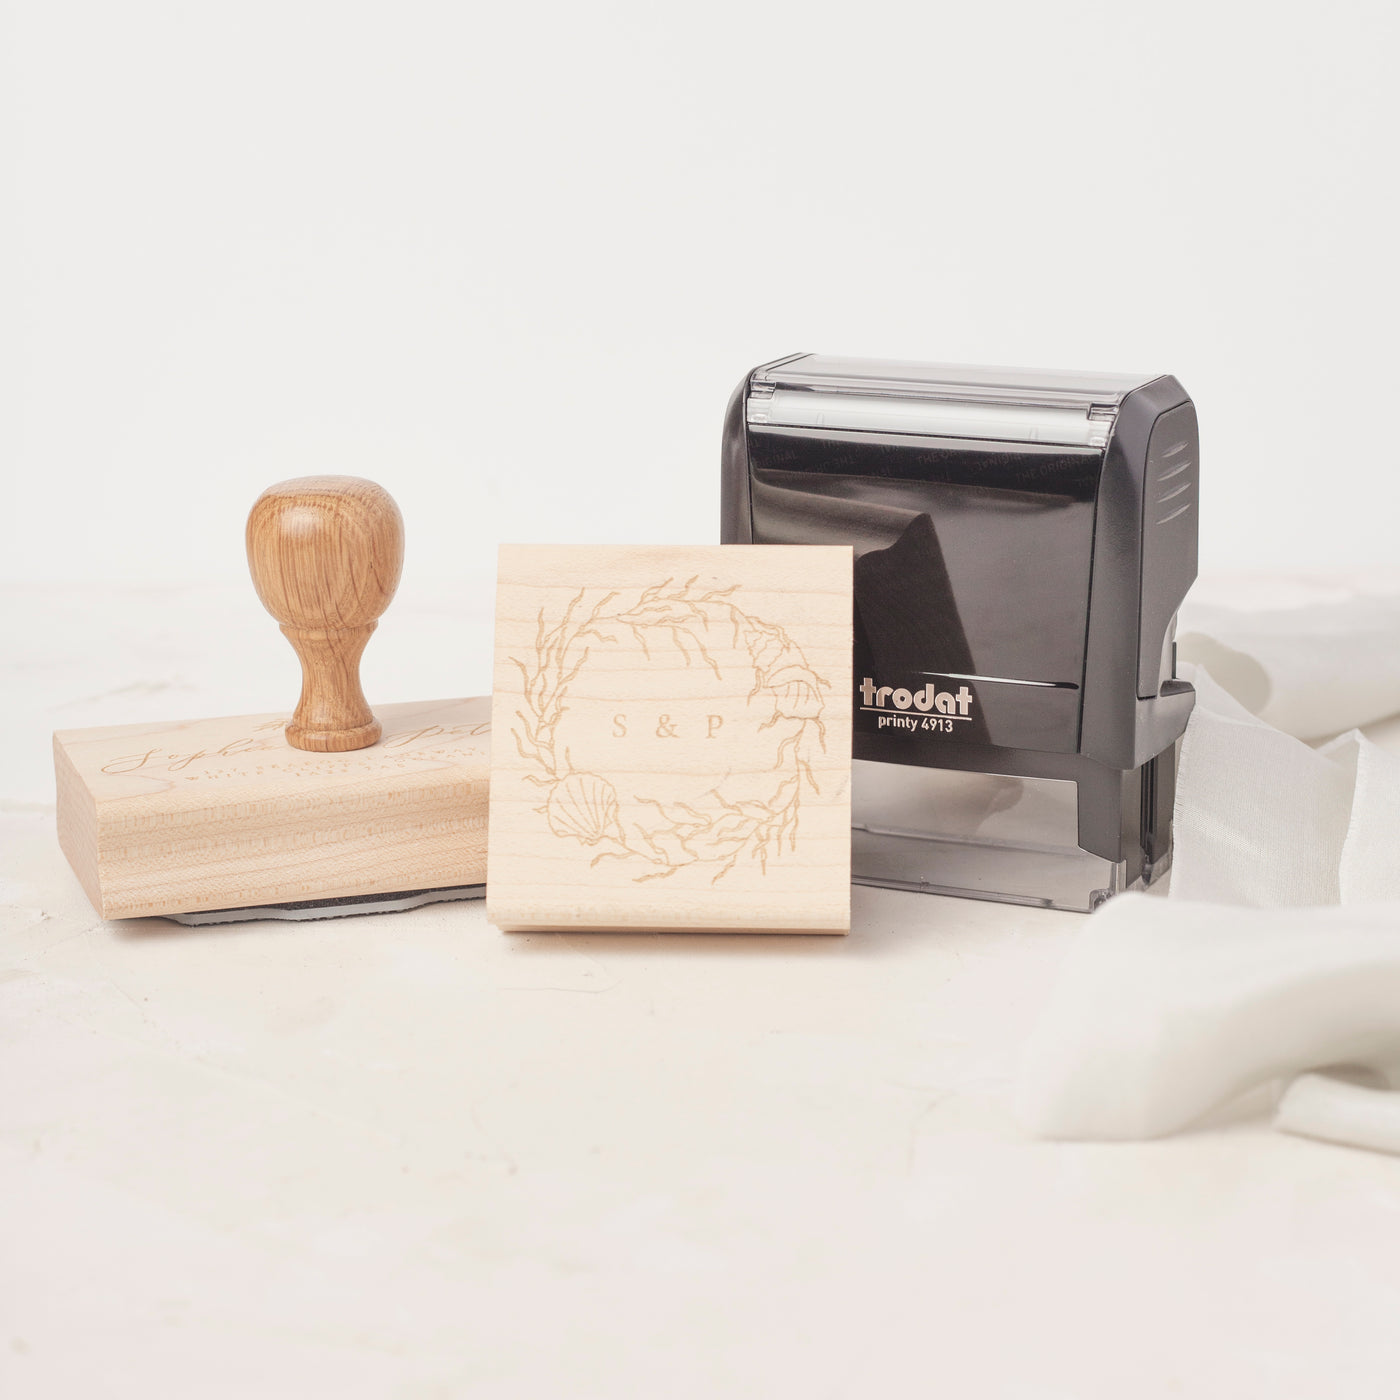 Rubber Stamp Mounting Options | Wooden Block with Oak Handle and Self-Inking Stamper | Heirloom Seals